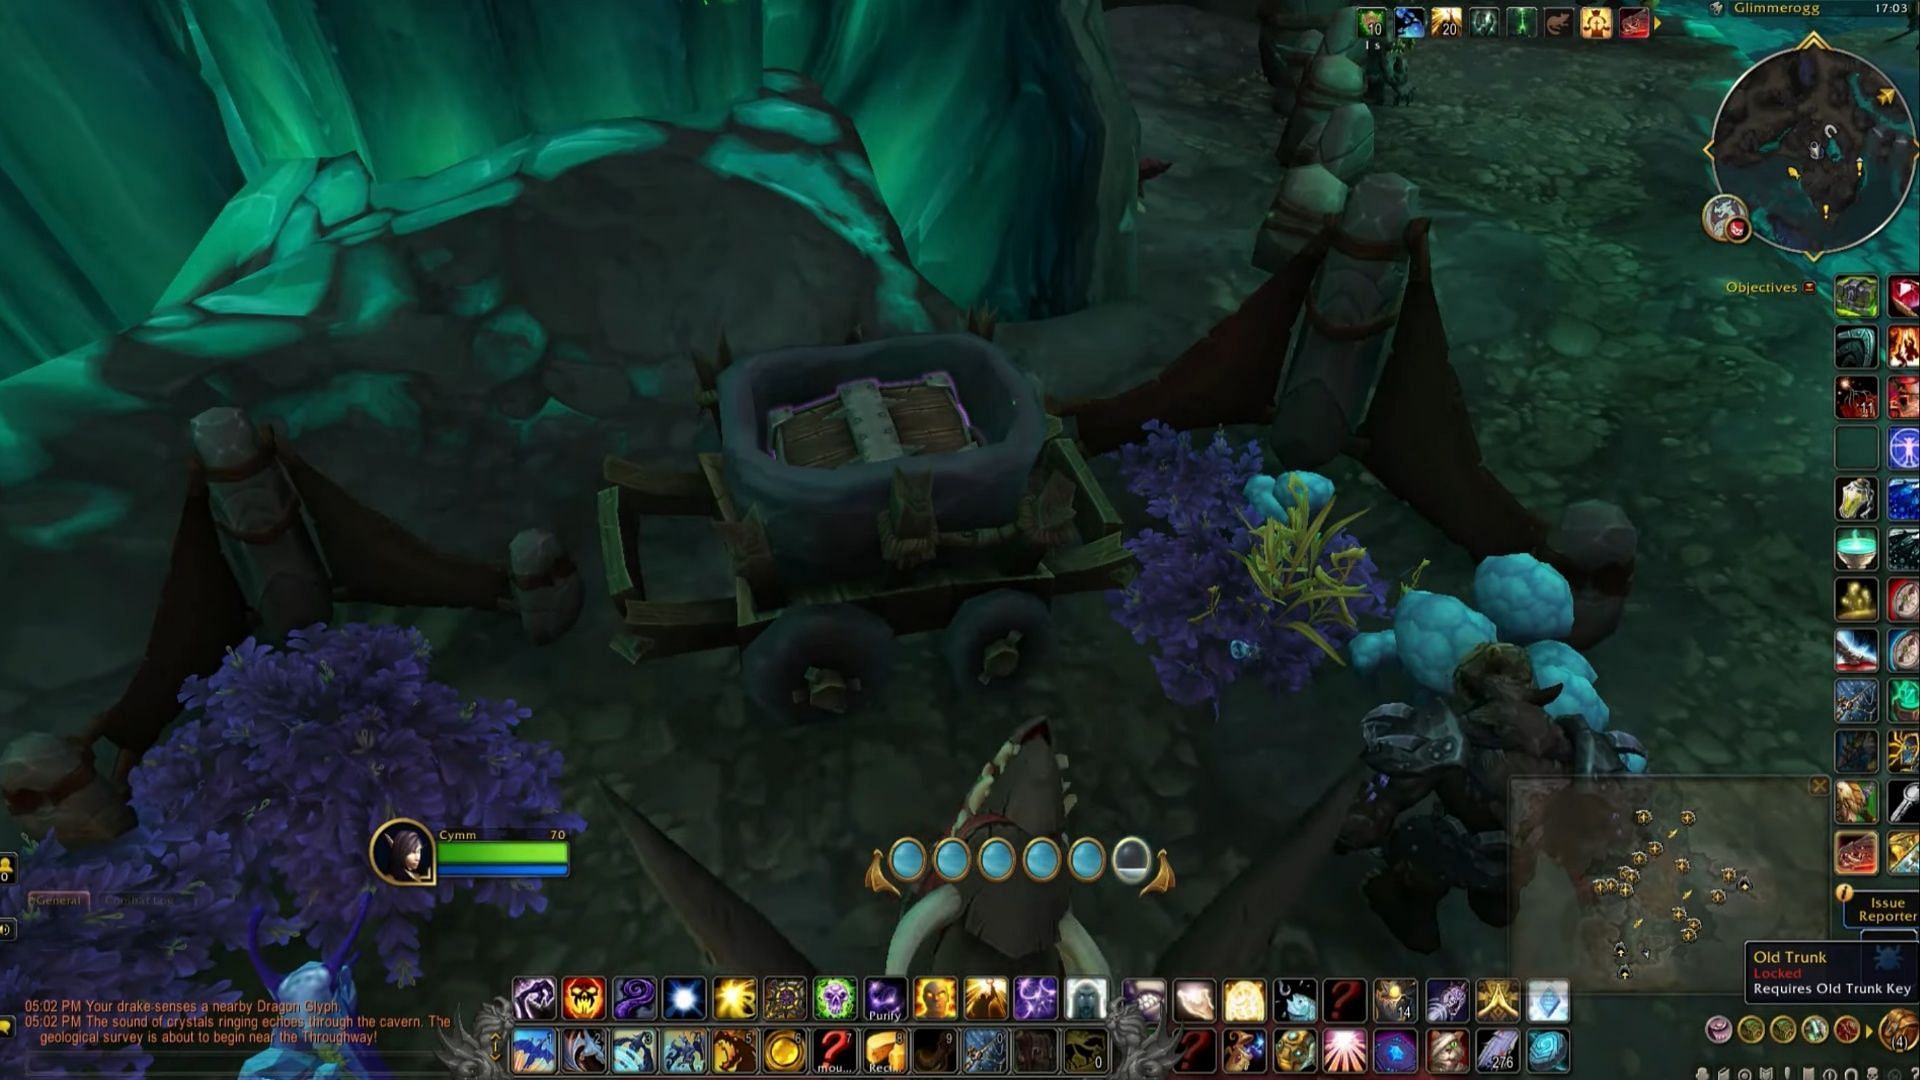 If you want to open the Old Trunk, first you need the Old Trunk Key in World of Warcraft: Dragonflight.